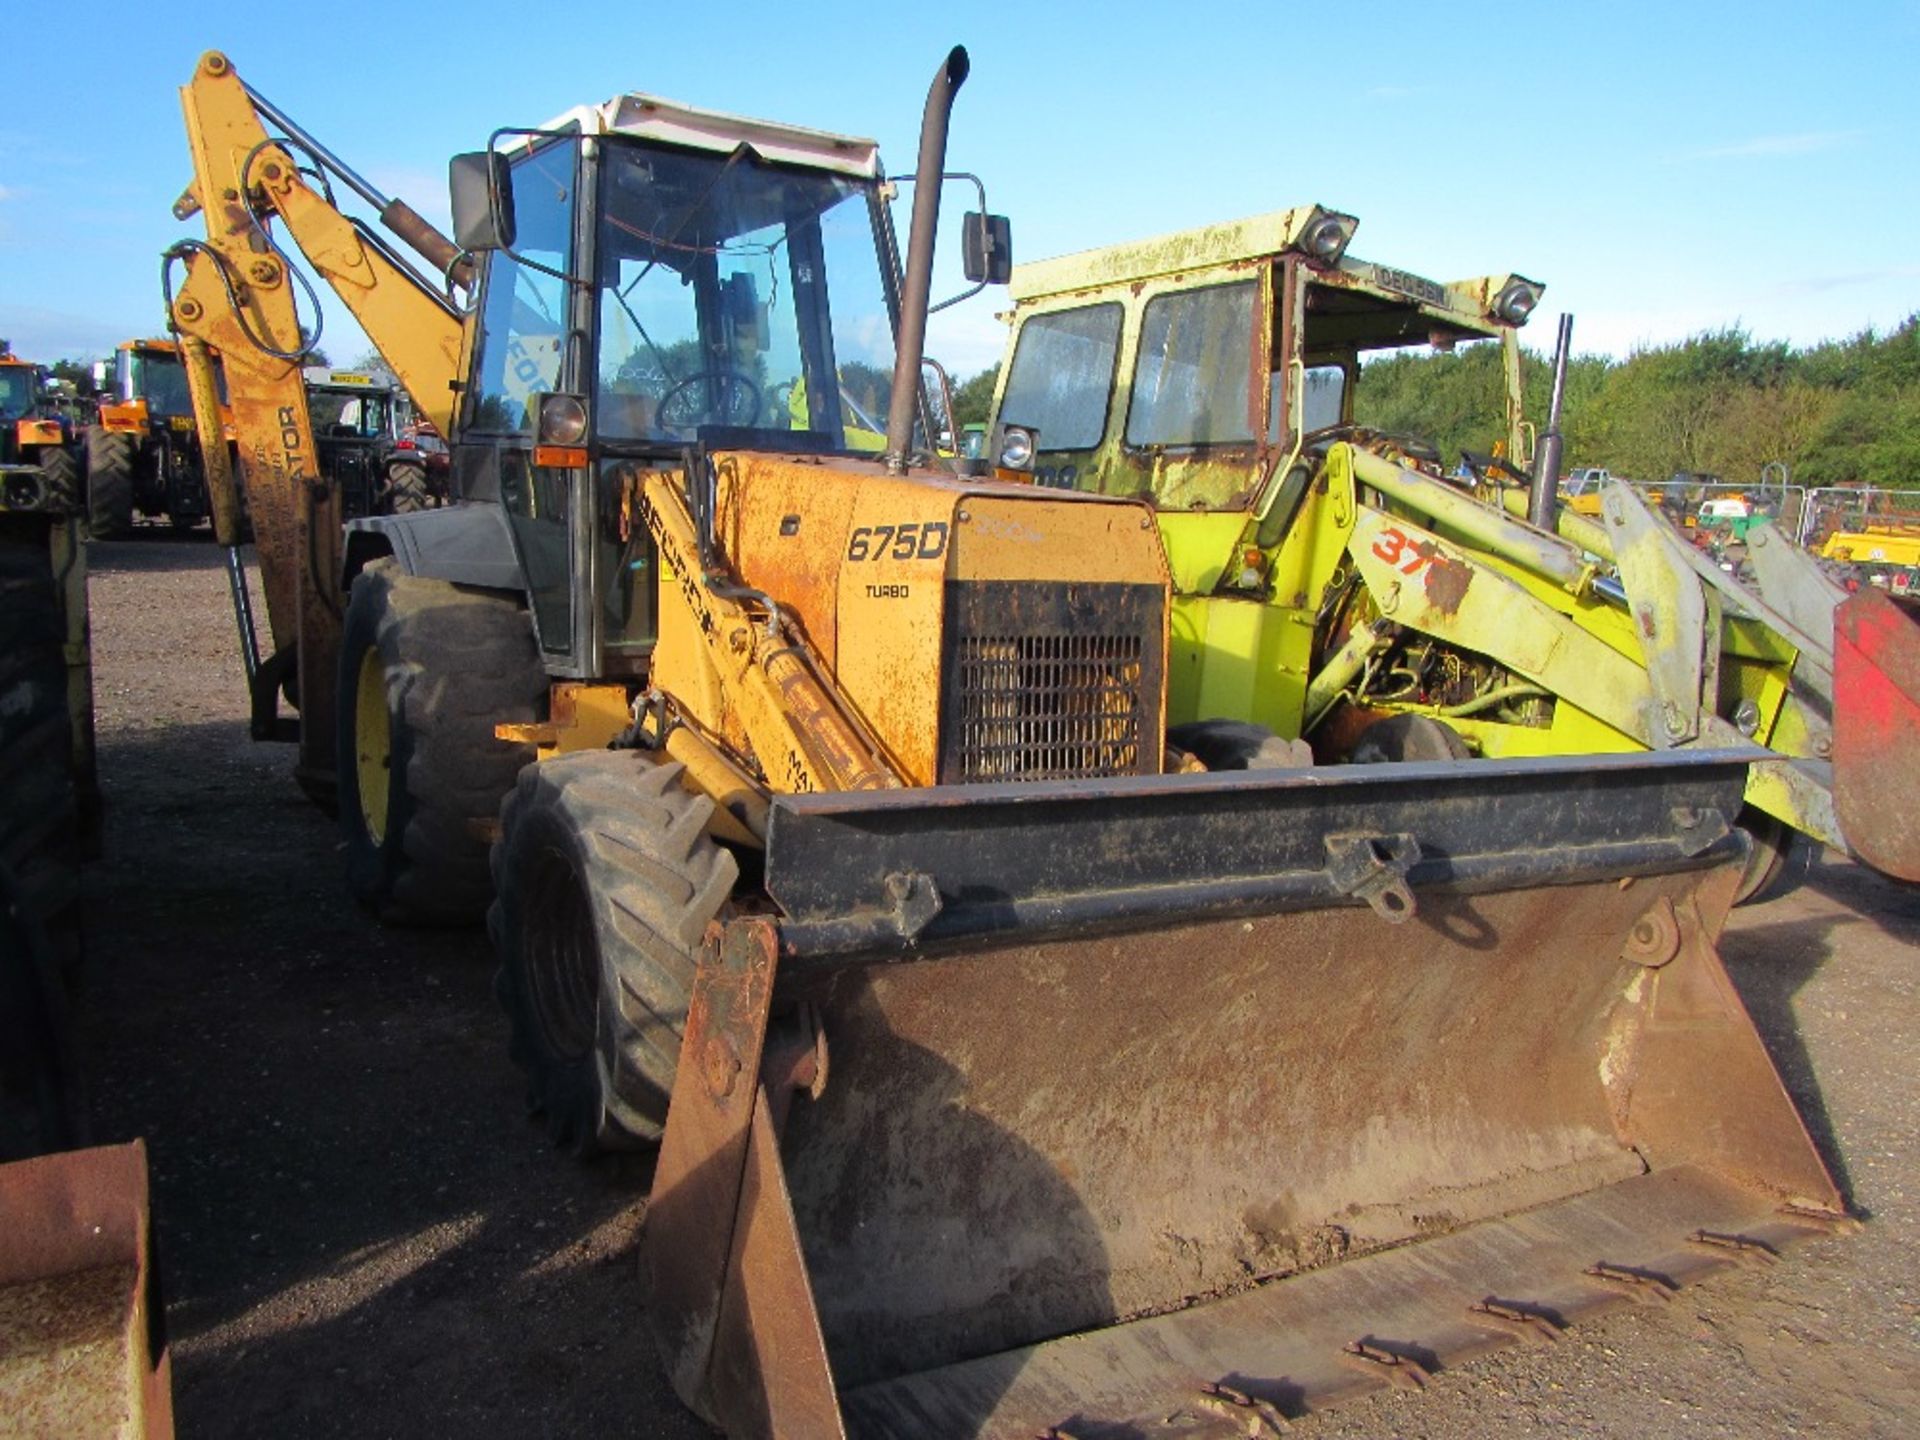 1993 Ford 675D 4wd Digger Loader with 4 in 1 Front Bucket & Extra Dig Reg. No. L954 WCS Ser No - Image 2 of 5